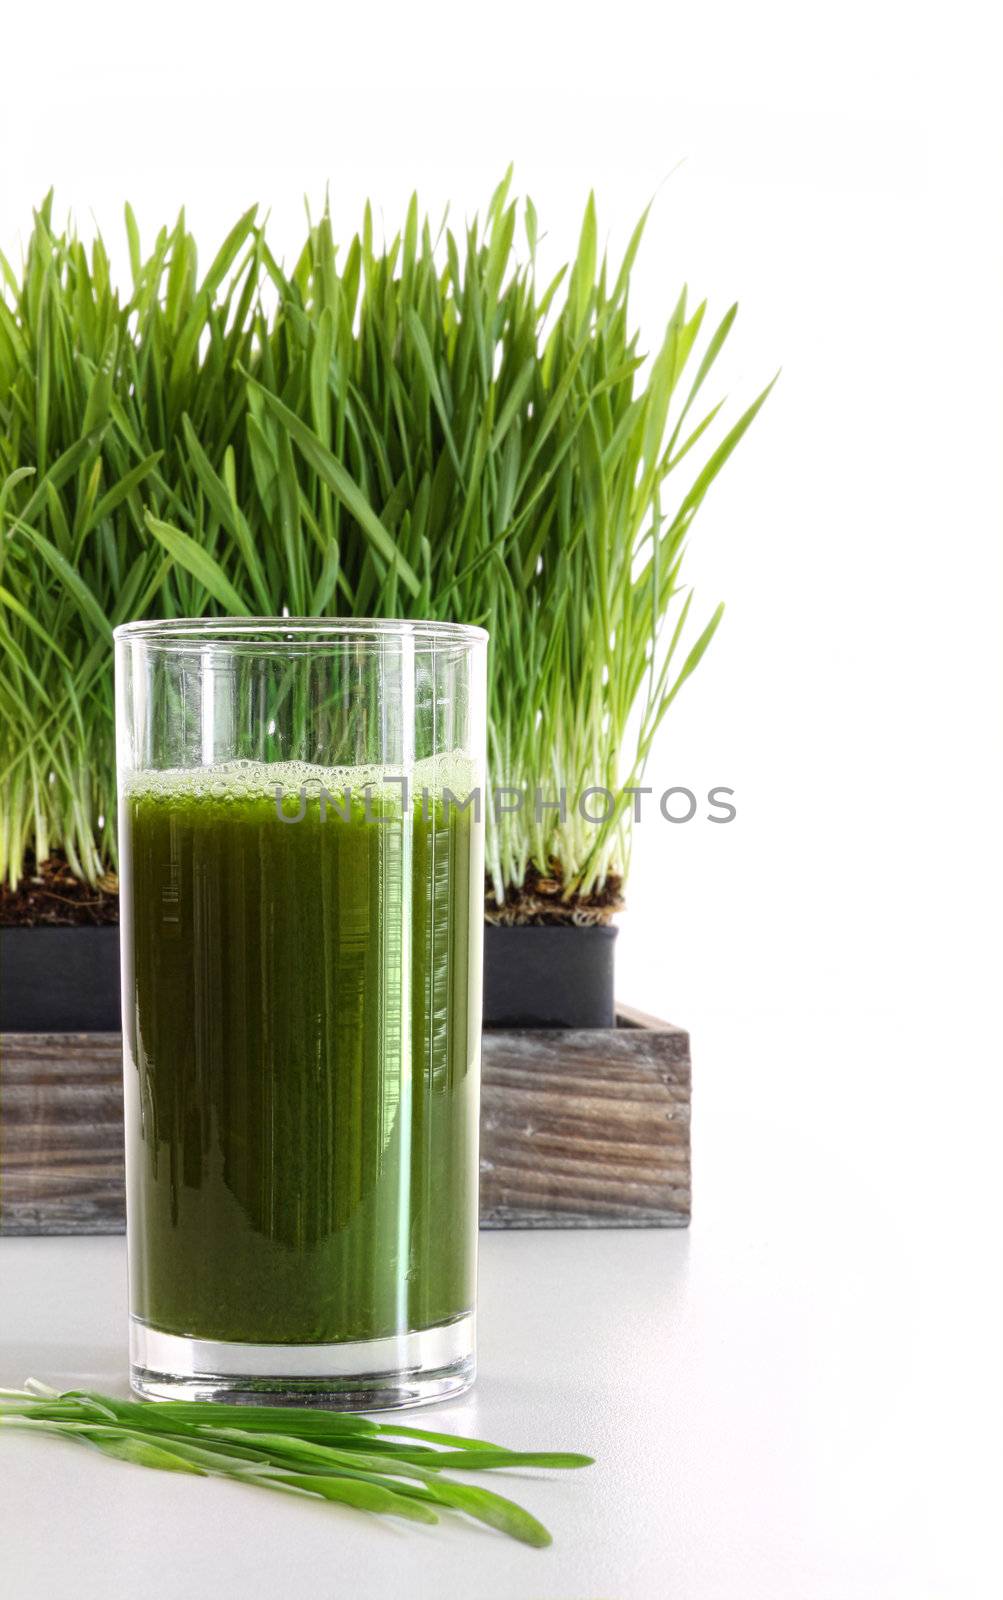 Glass of wheatgrass against a white background